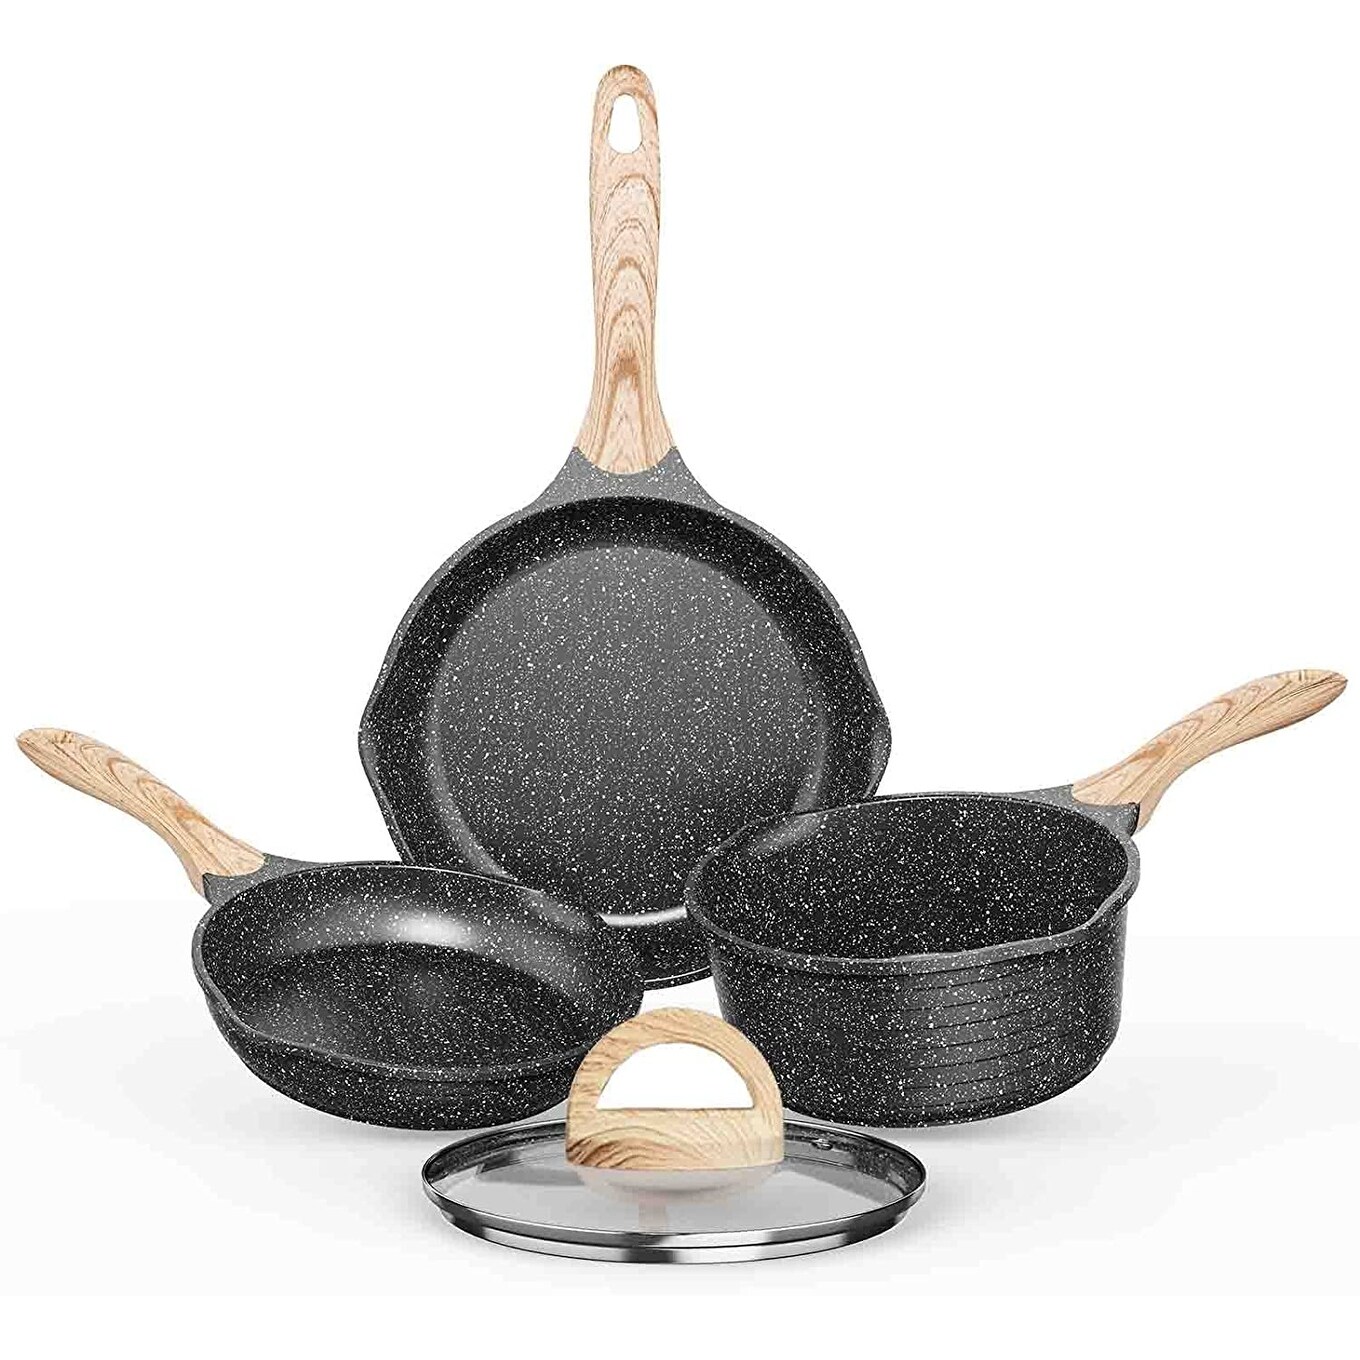 https://ak1.ostkcdn.com/images/products/is/images/direct/6f5d2365774ee3d44ea015762a277f41124fc768/Pots-and-Pans-Set-Nonstick%2C-Induction-Granite-Coating-Cookware-Sets-4-Pieces-with-Frying-Pan%2C-Saucepan.jpg